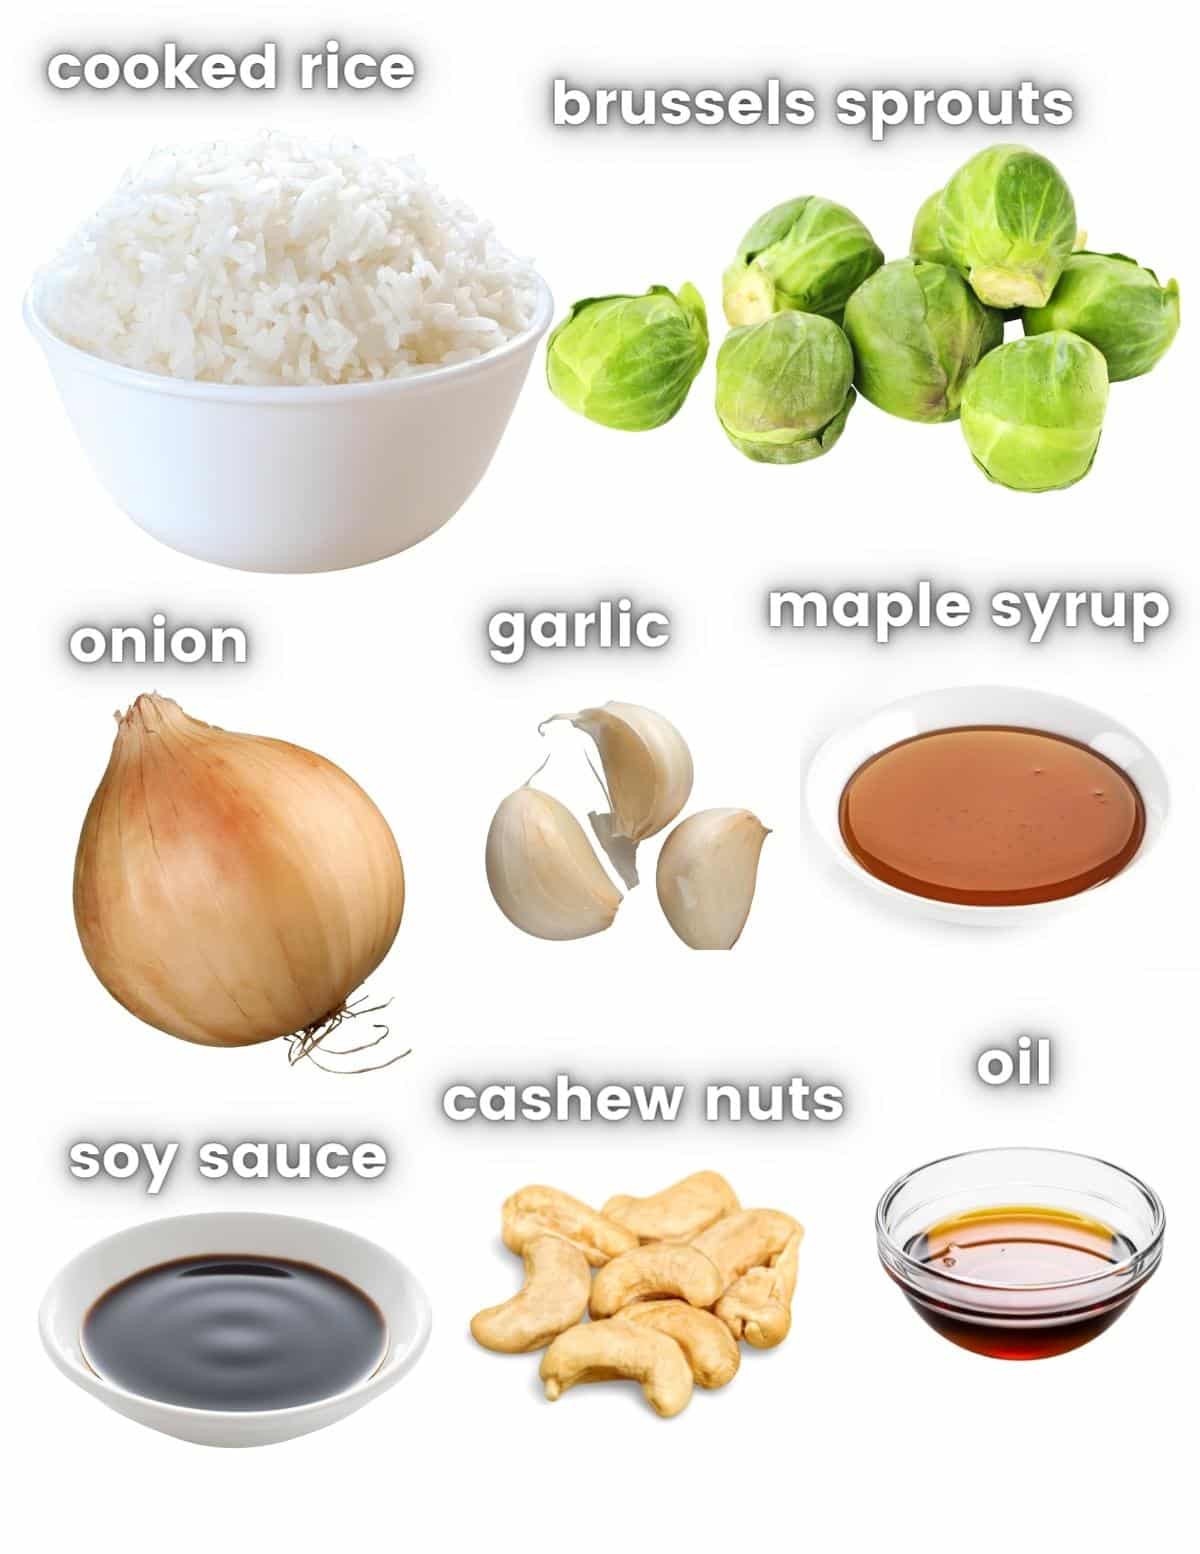 ingredients needed to make brussels sprout fried rice